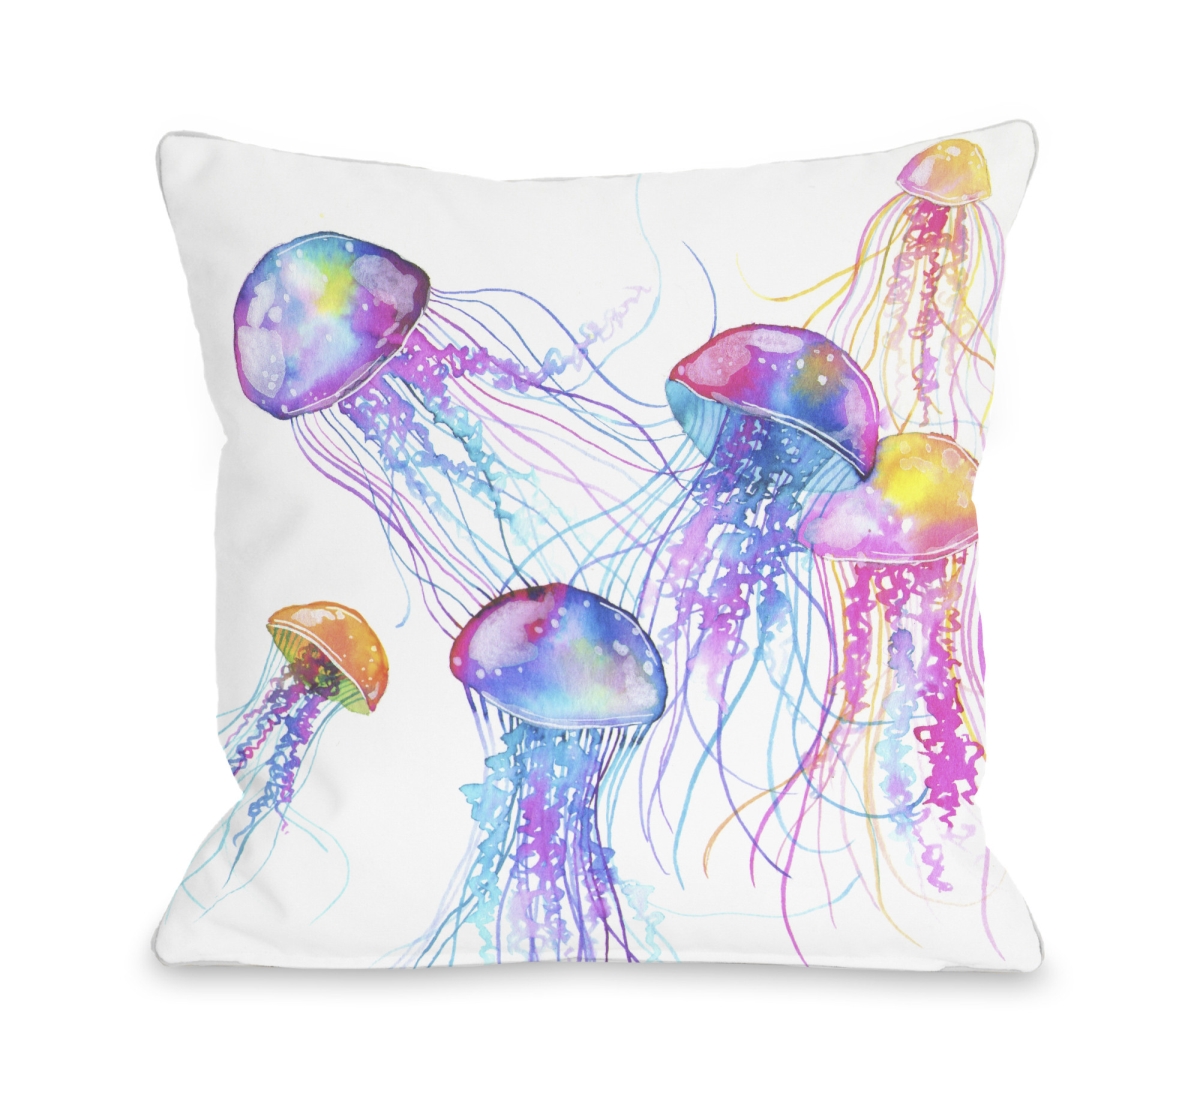 72696pl16o 16 X 16 In. Jellyfish Pillow Outdoor, Multicolor